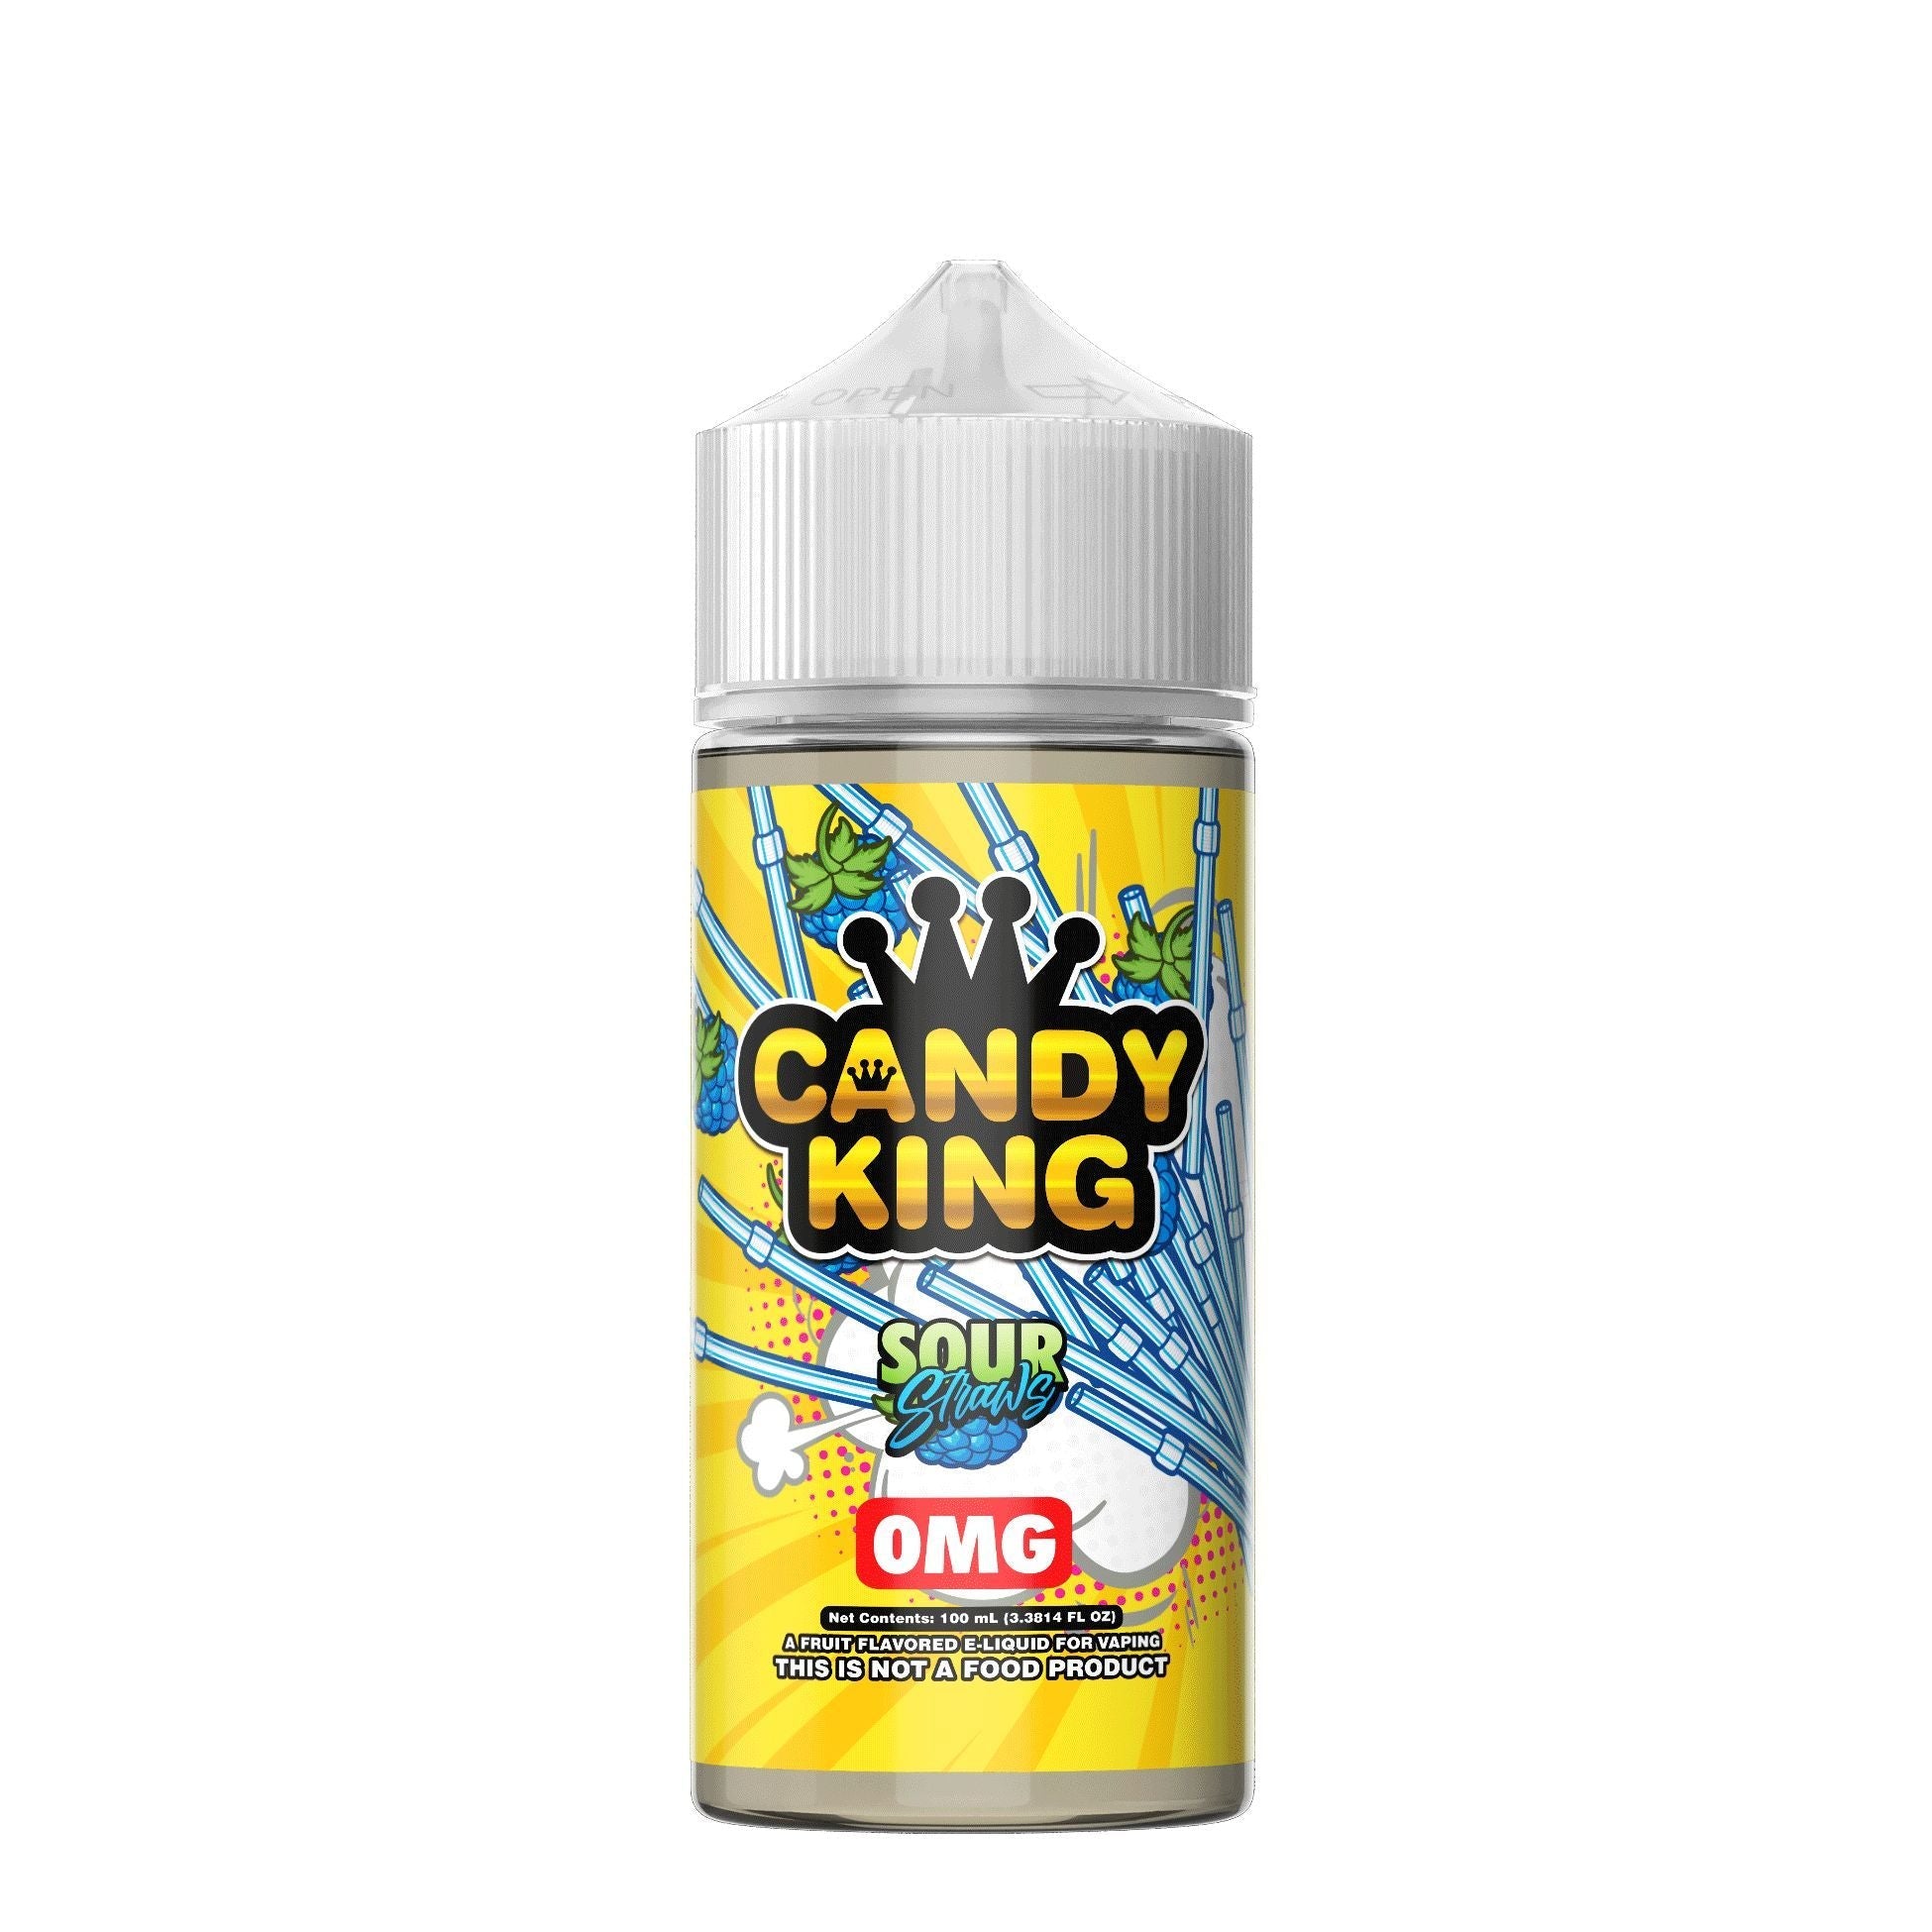 Buy Sour Straws by Candy King - Wick And Wire Co Melbourne Vape Shop, Victoria Australia